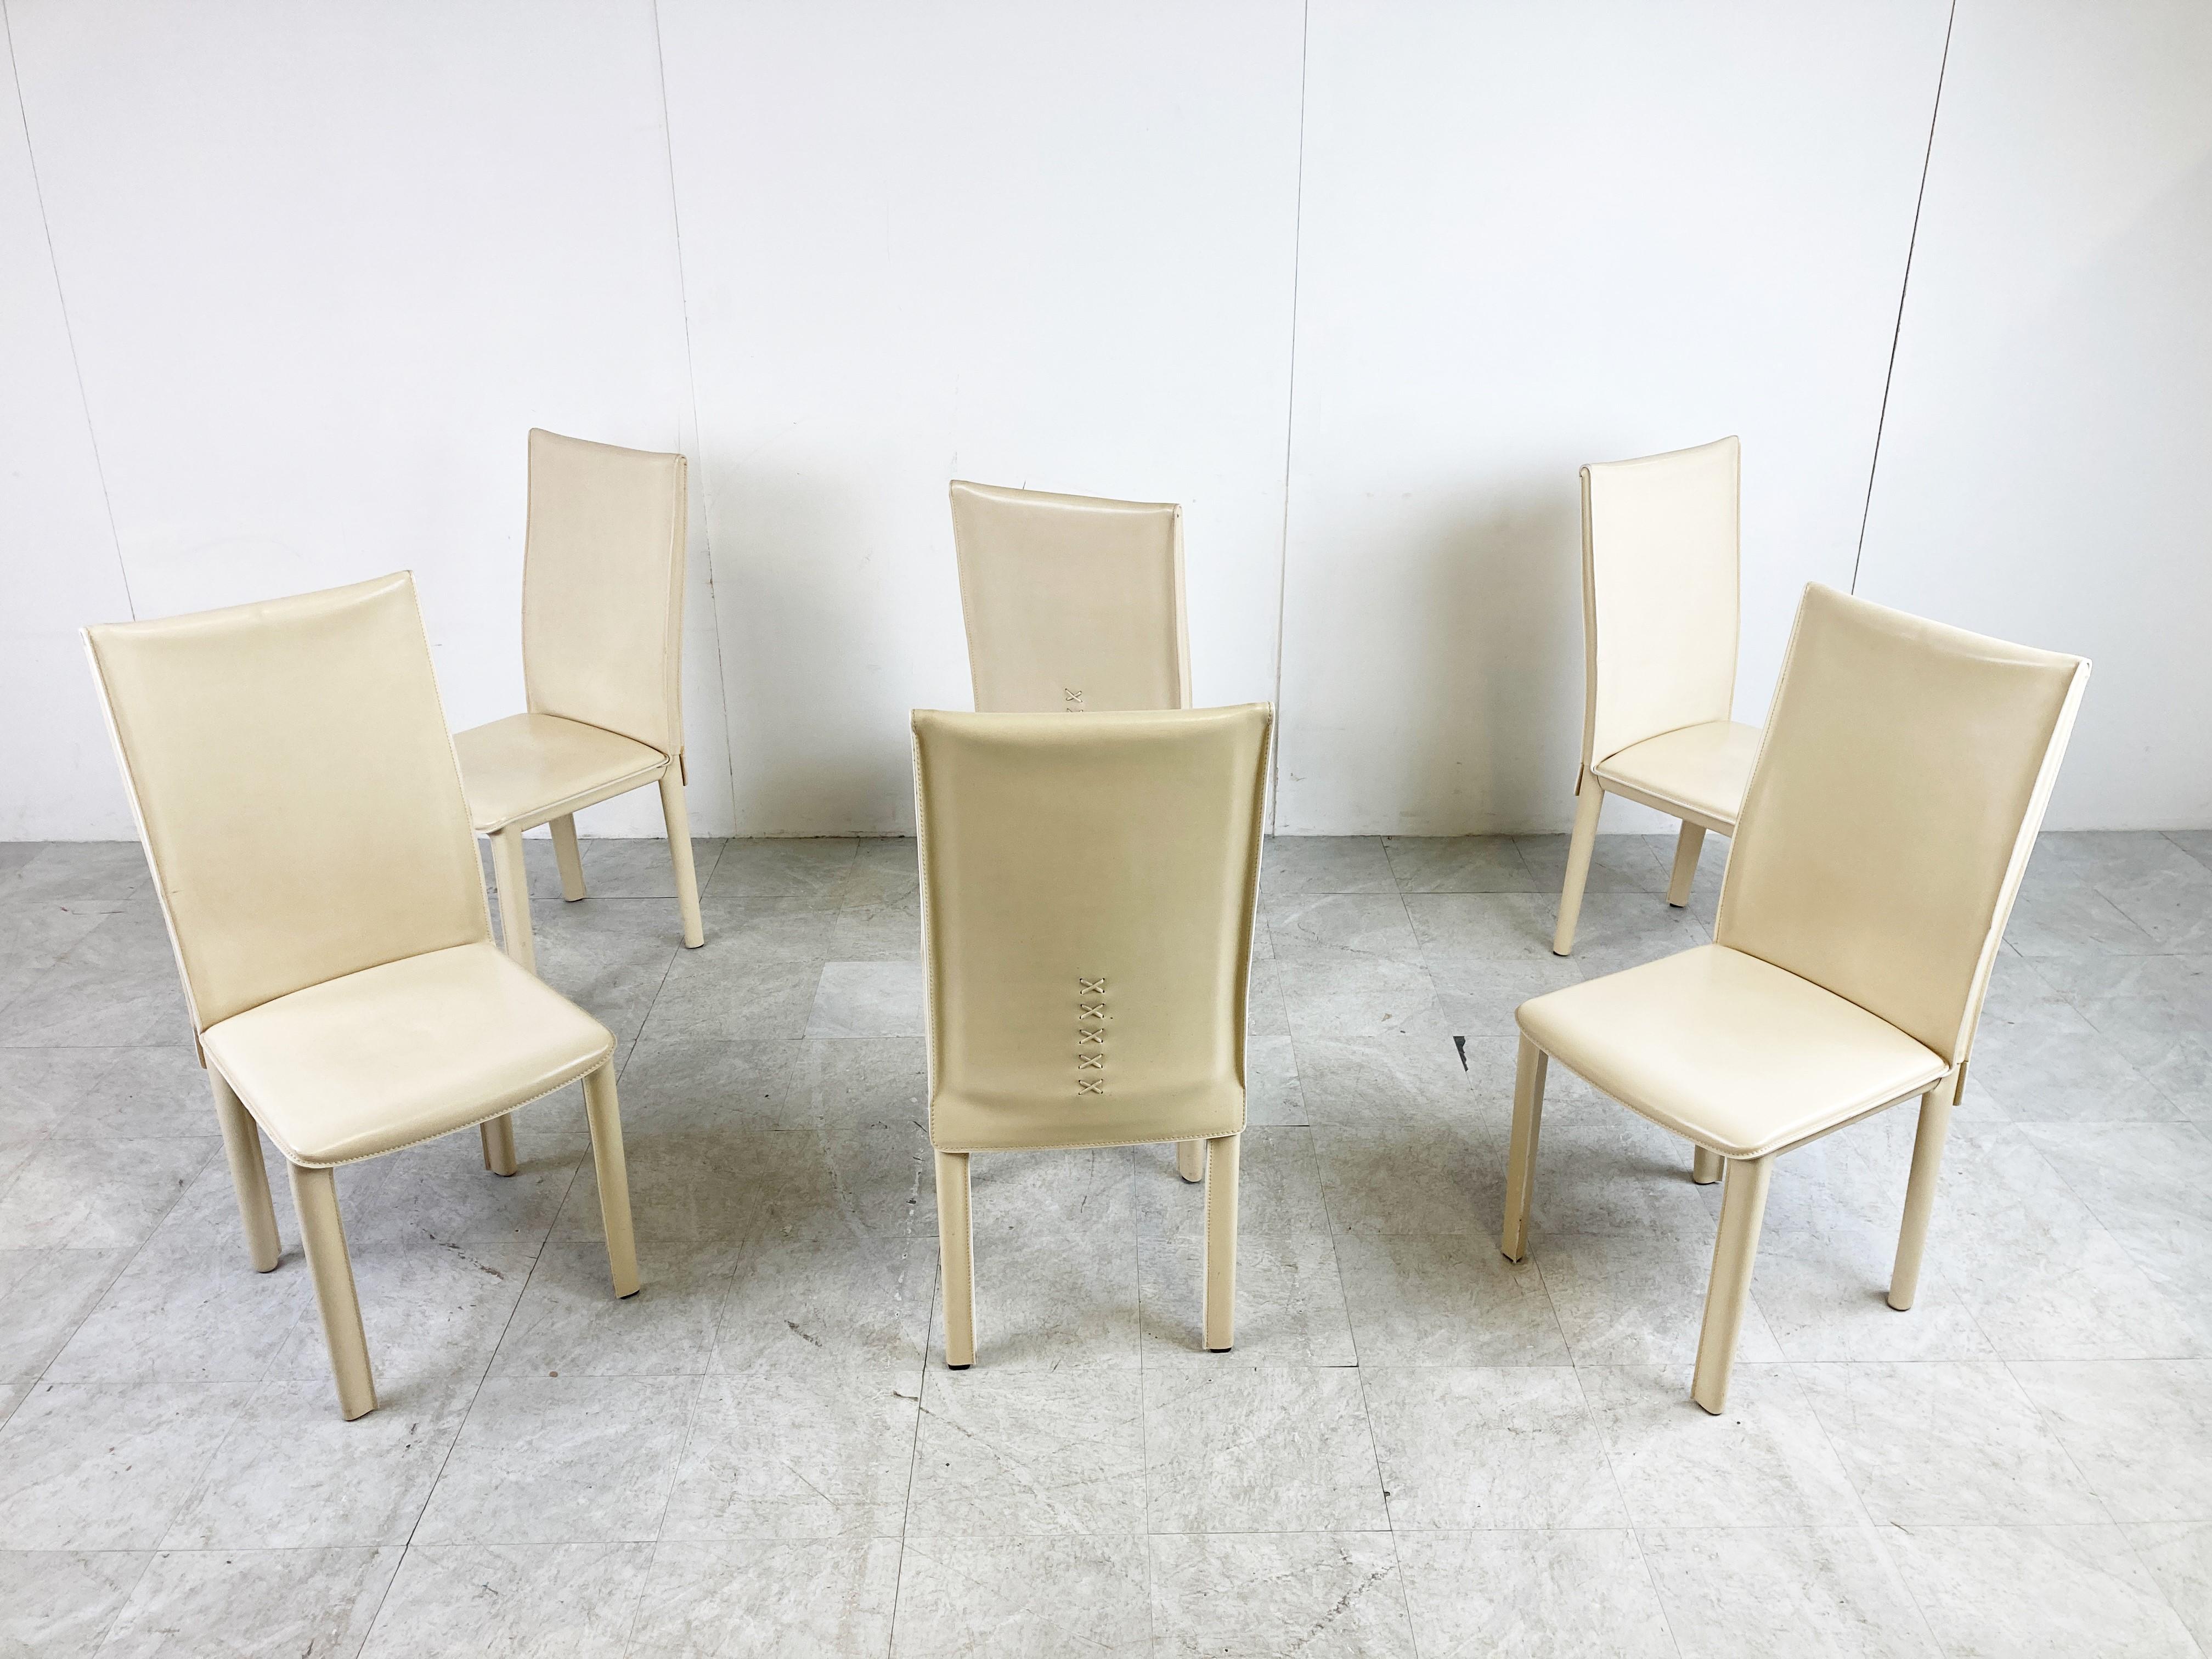 Vintage Dining Chairs by Arper Italy, 1980s For Sale 4